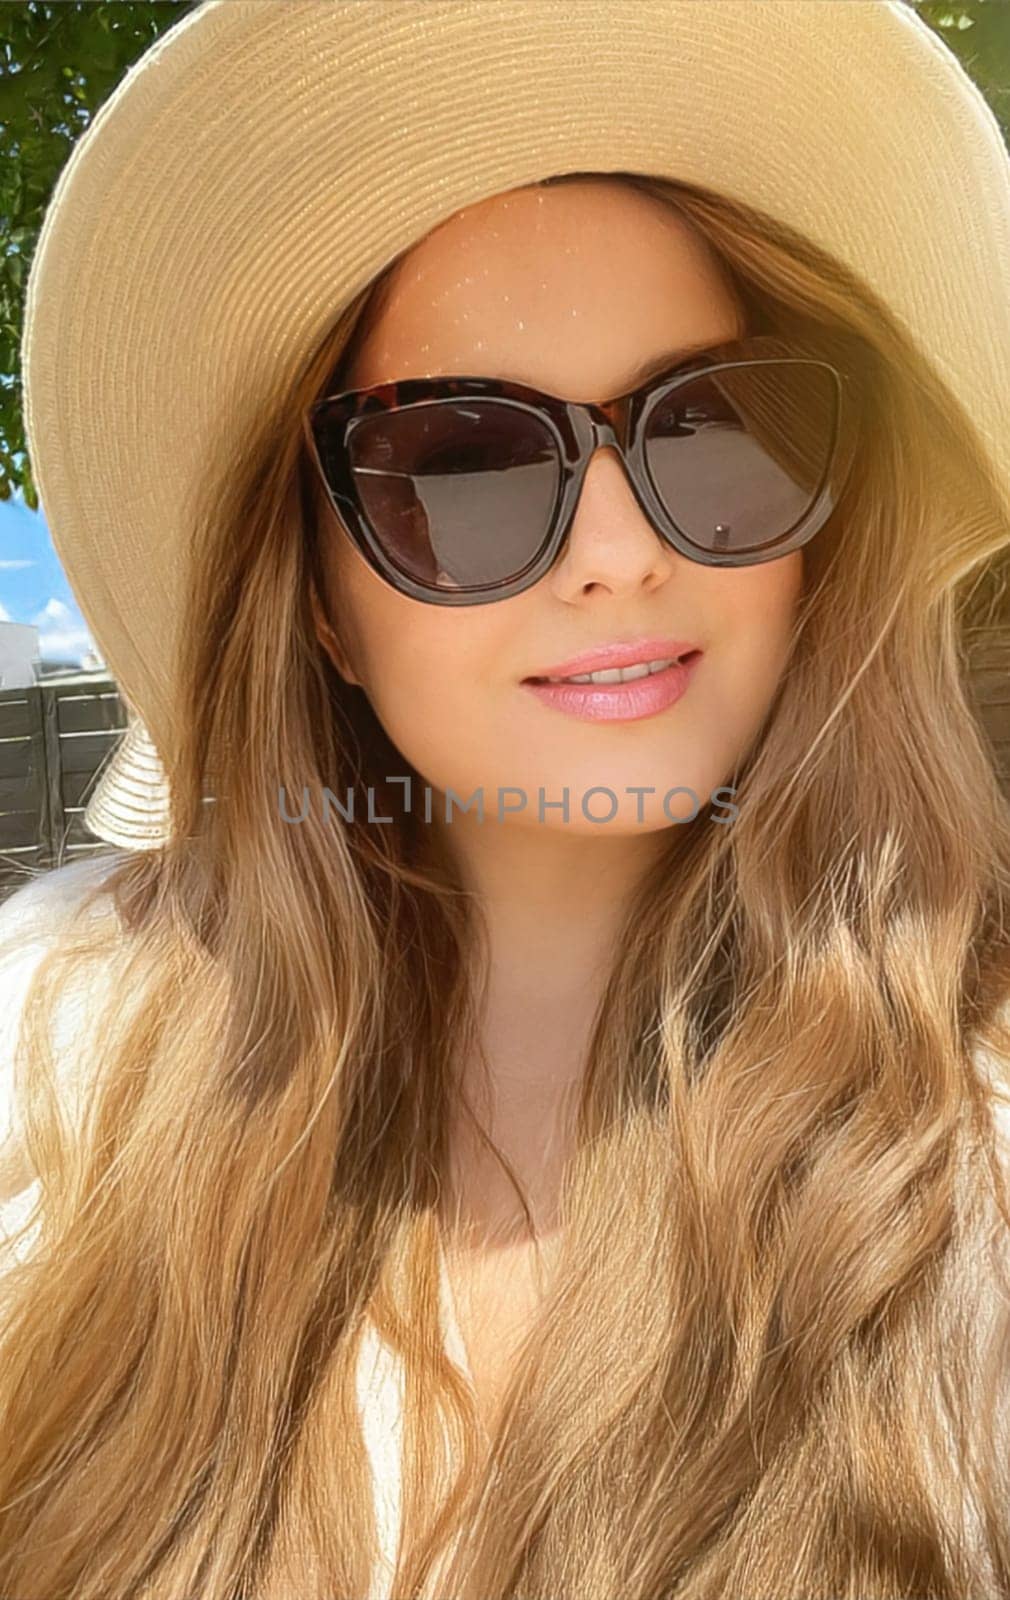 Beauty, summer holiday and fashion, face portrait of happy woman wearing hat and sunglasses, for skincare cosmetics, sunscreen spf lifestyle look idea